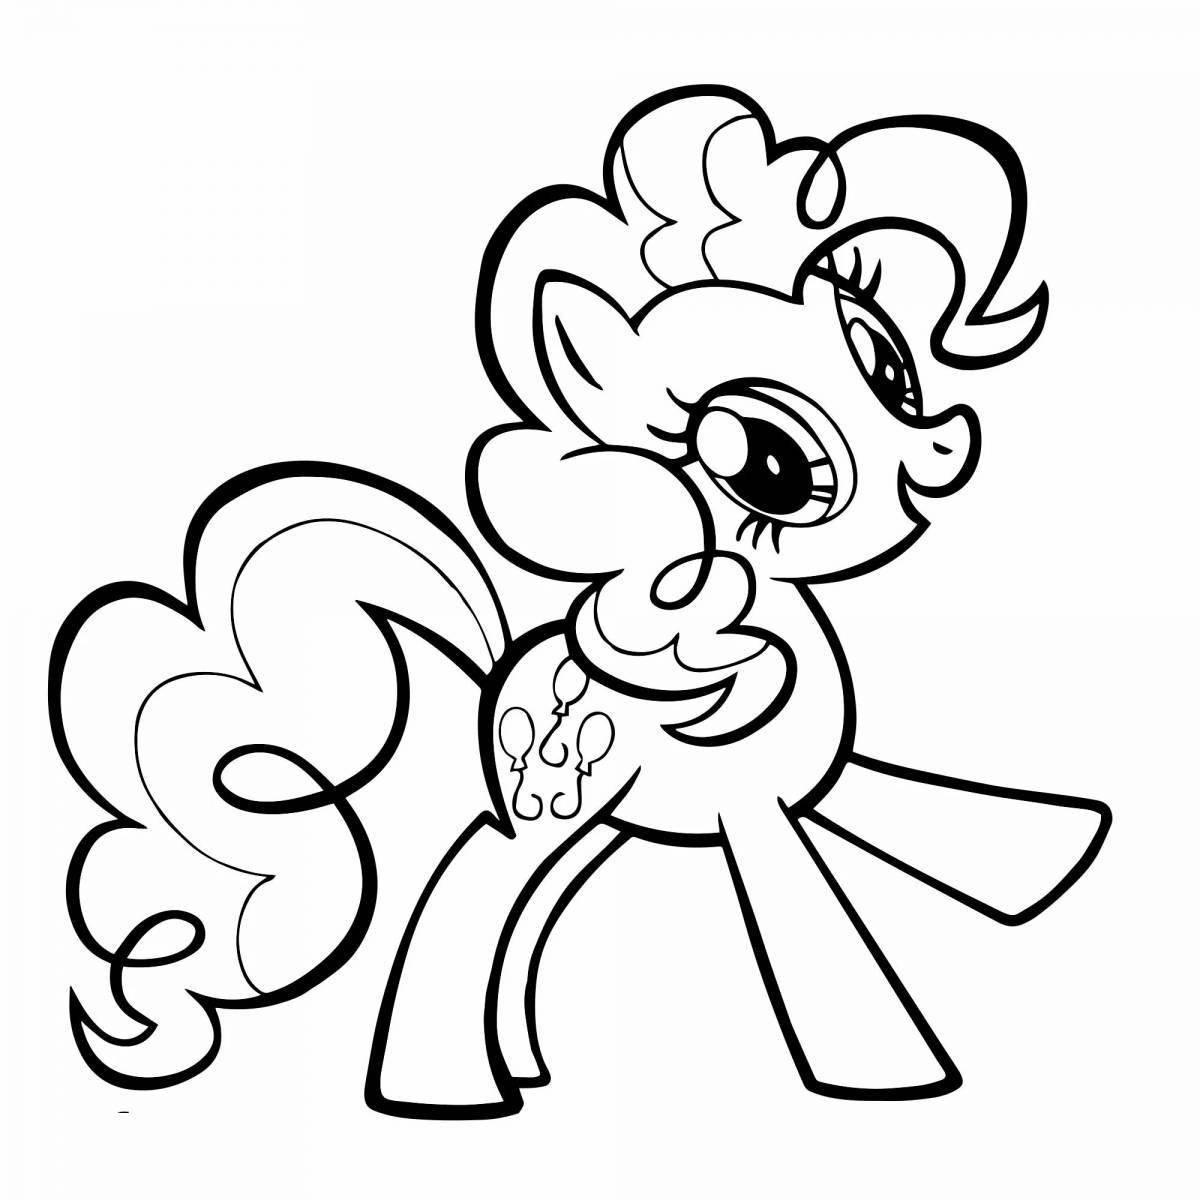 Cute pony coloring for 4-5 year olds